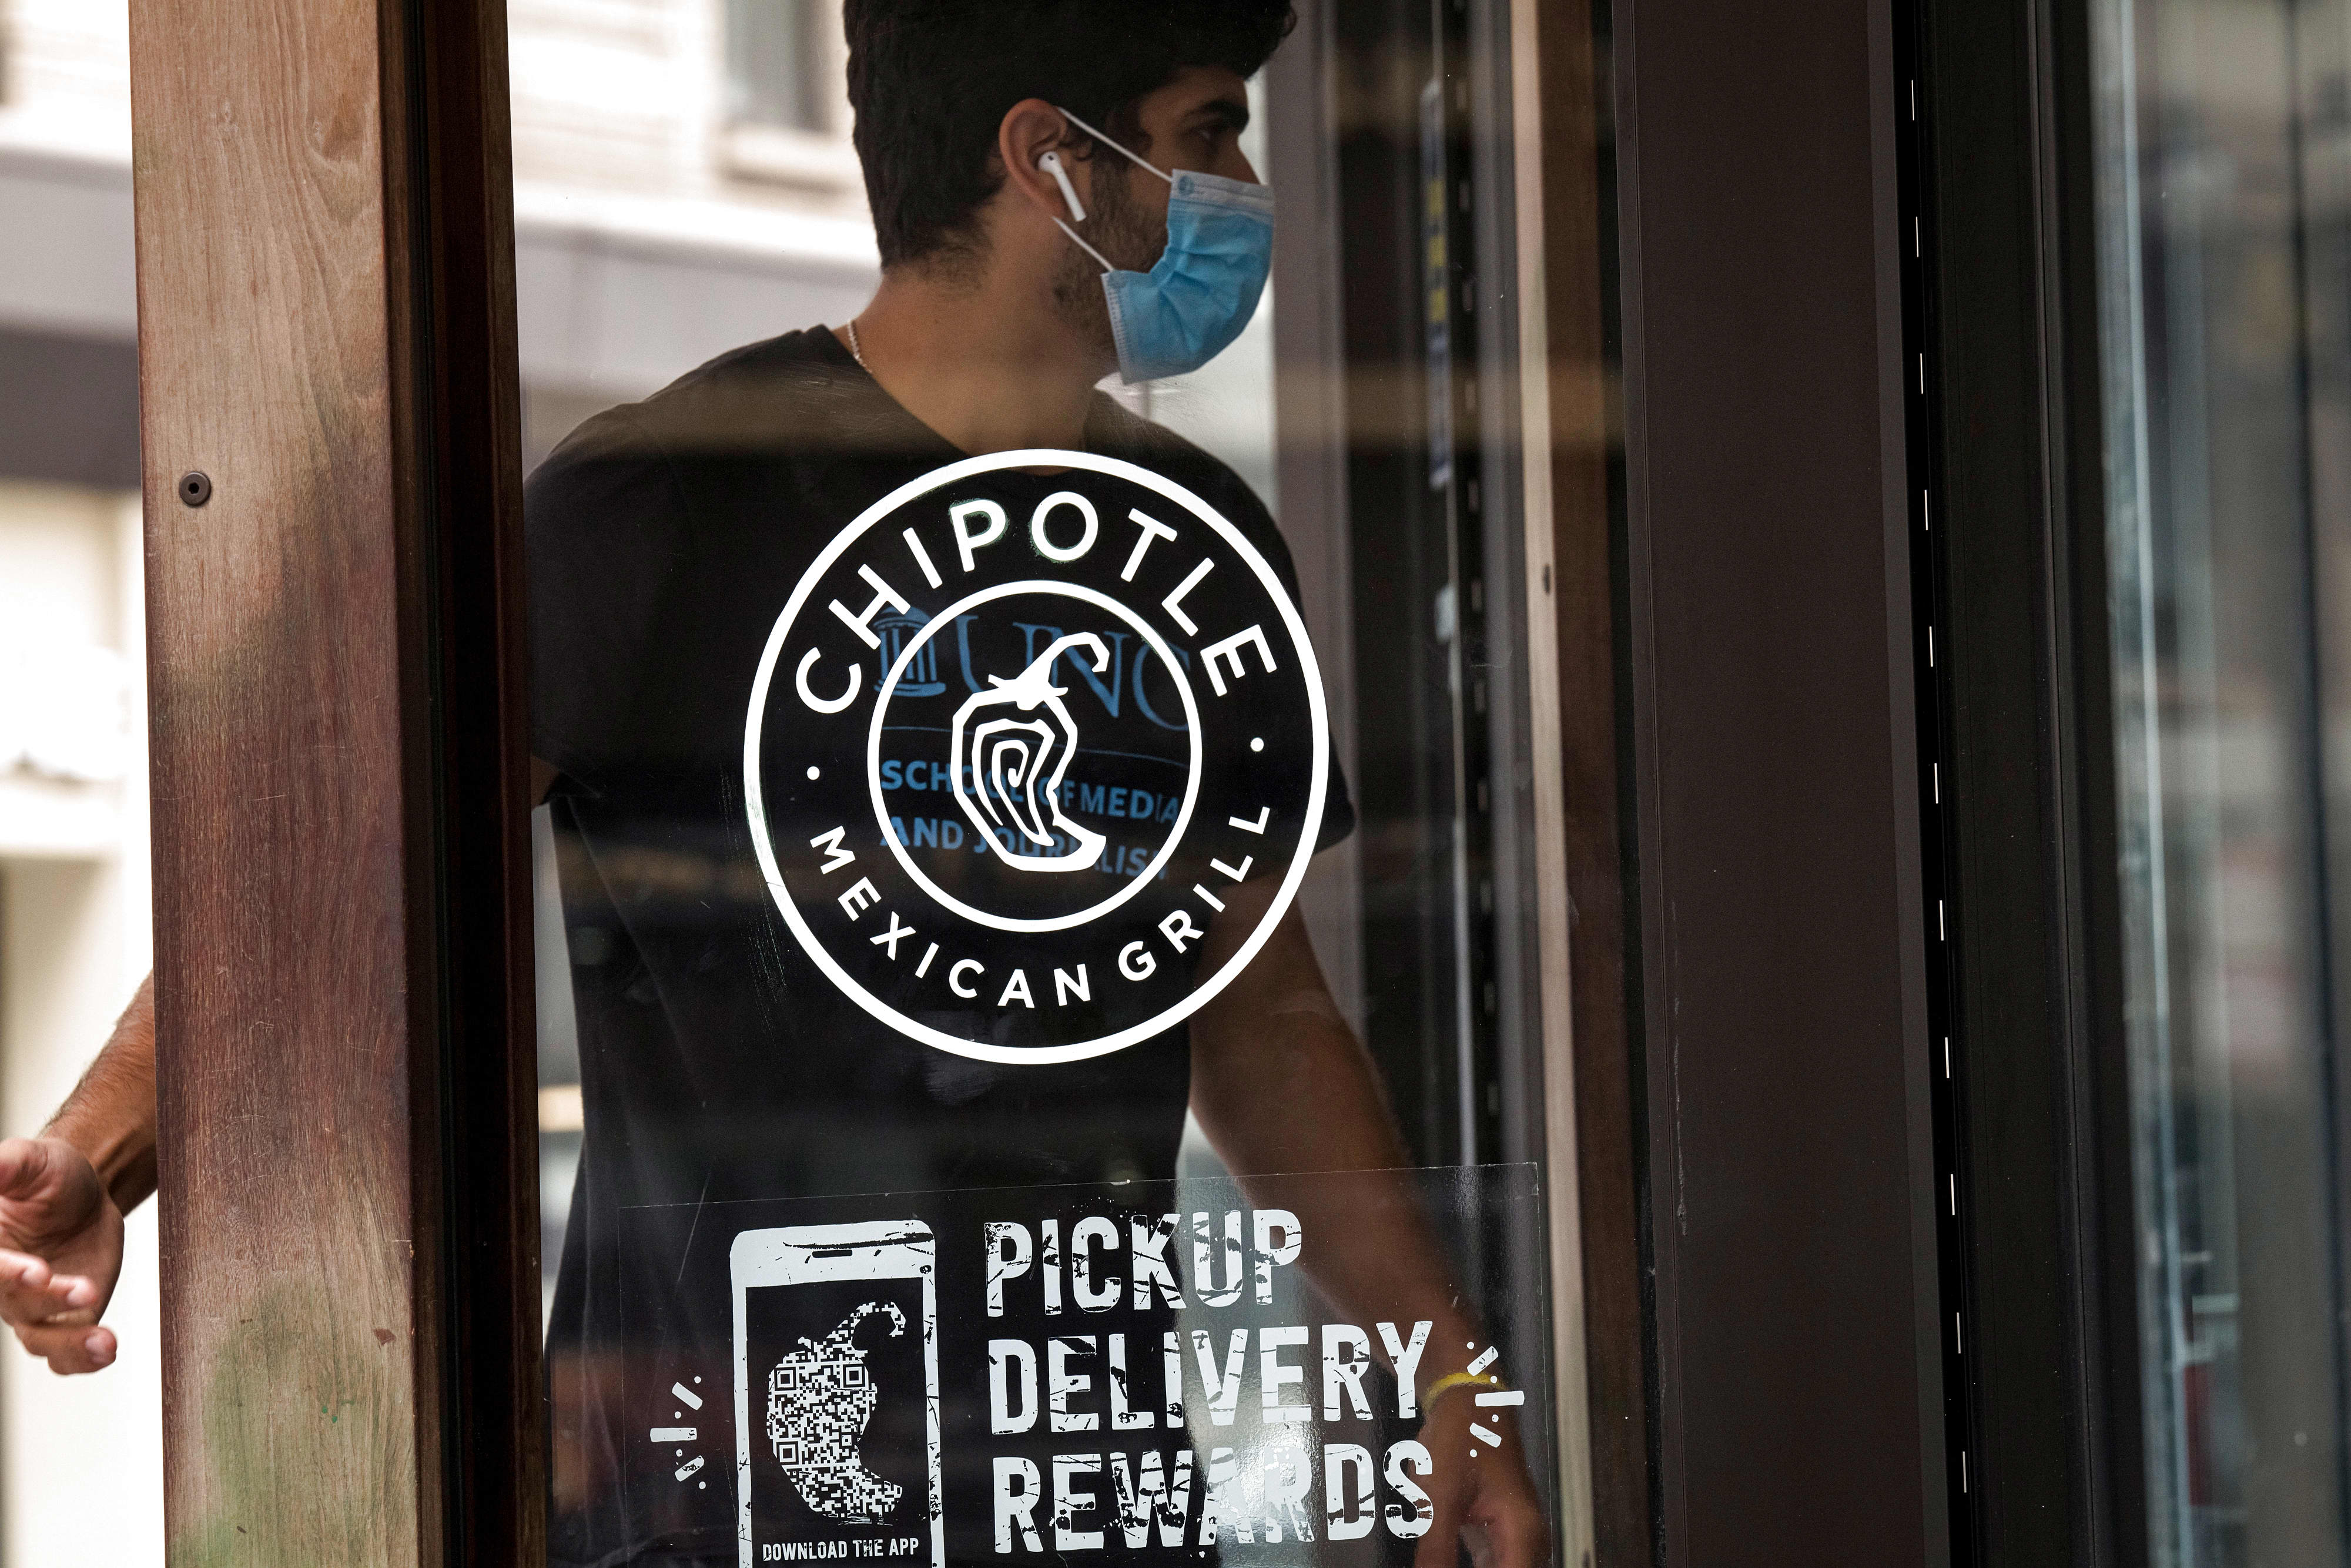 Chipotle’s digital sales remain strong as eateries reopen: chief financial officer